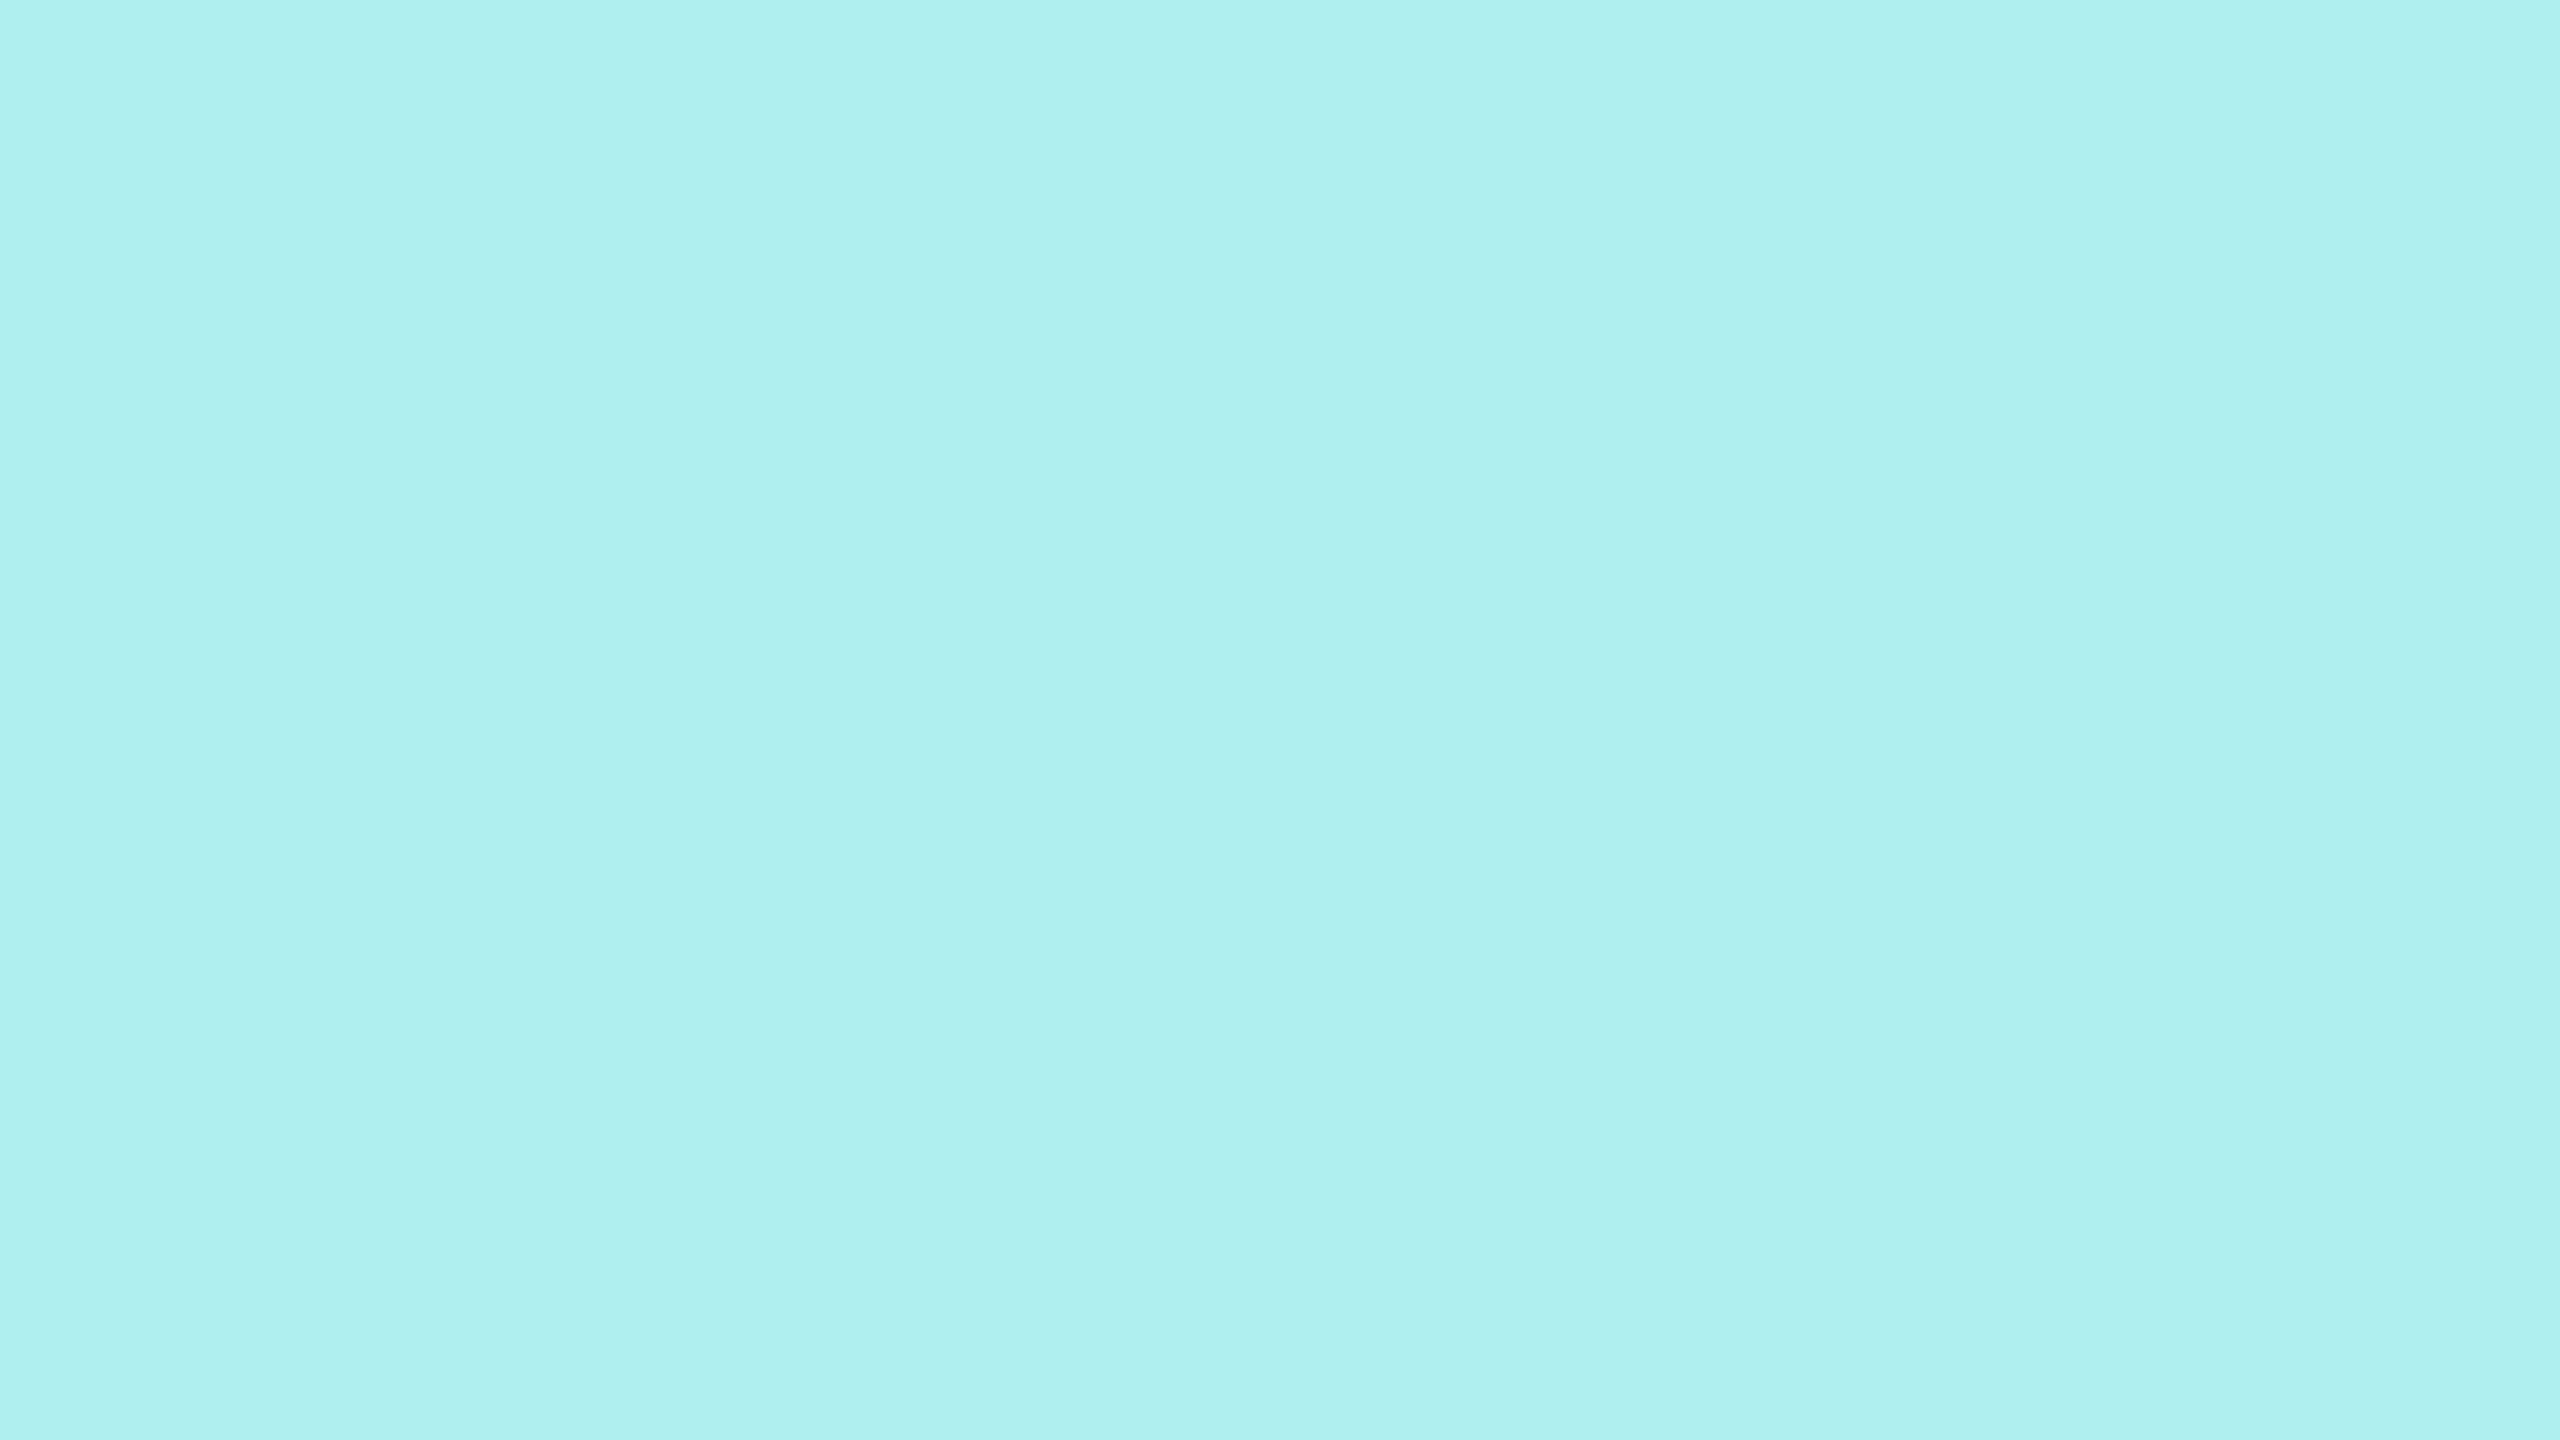 2560x1440-pale-turquoise-solid-color-background.jpg